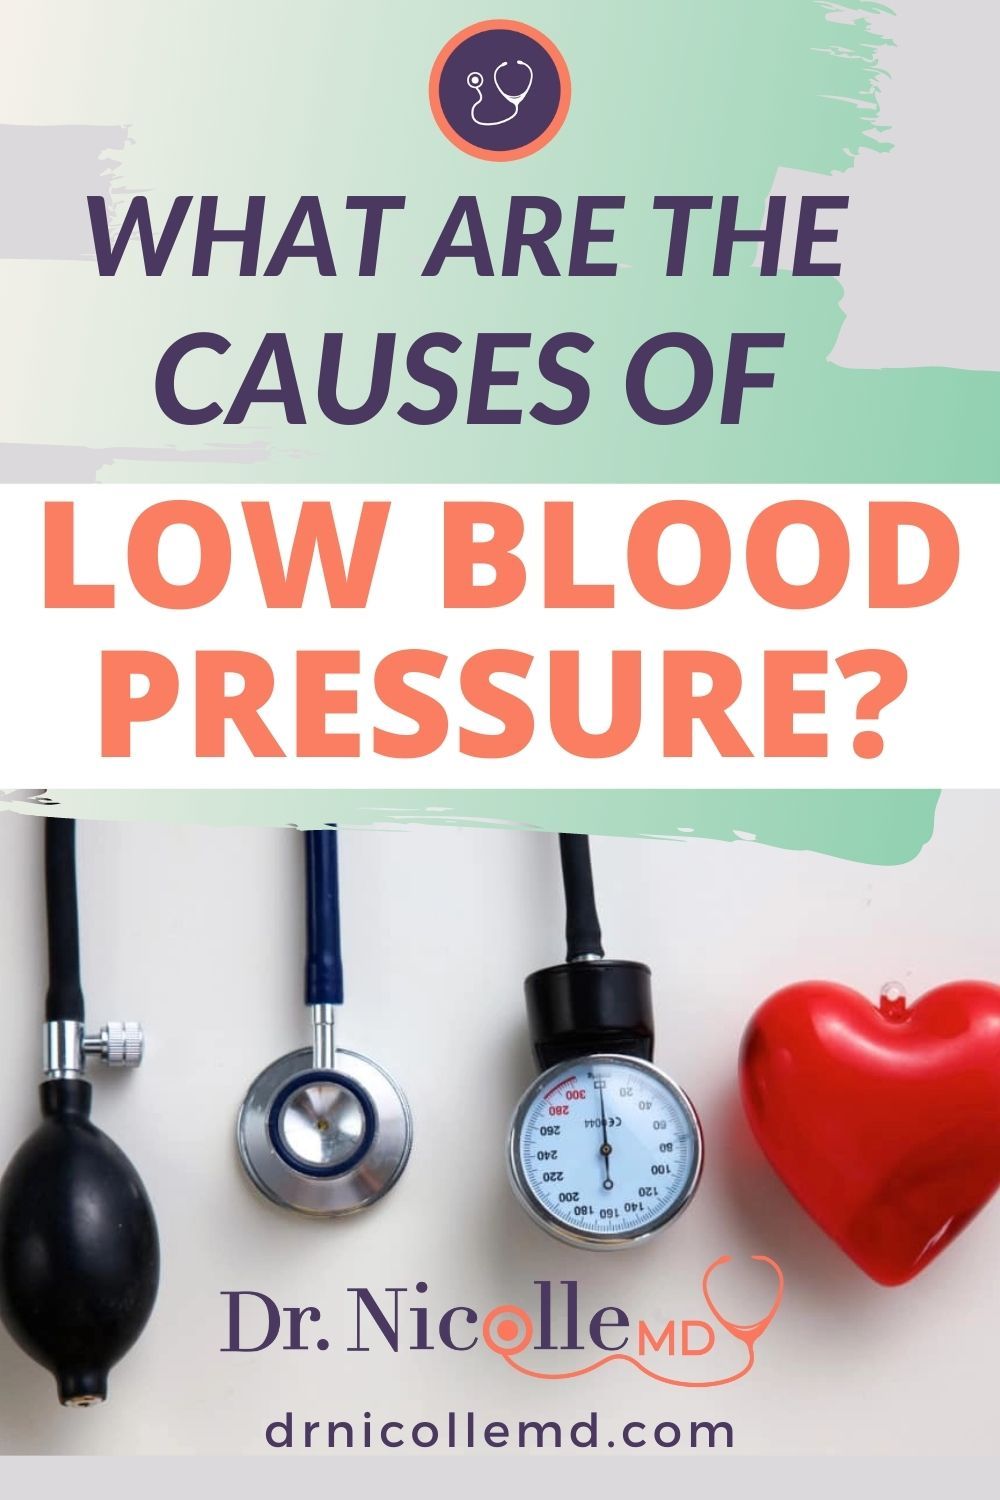 What are the Causes of Low Blood Pressure?